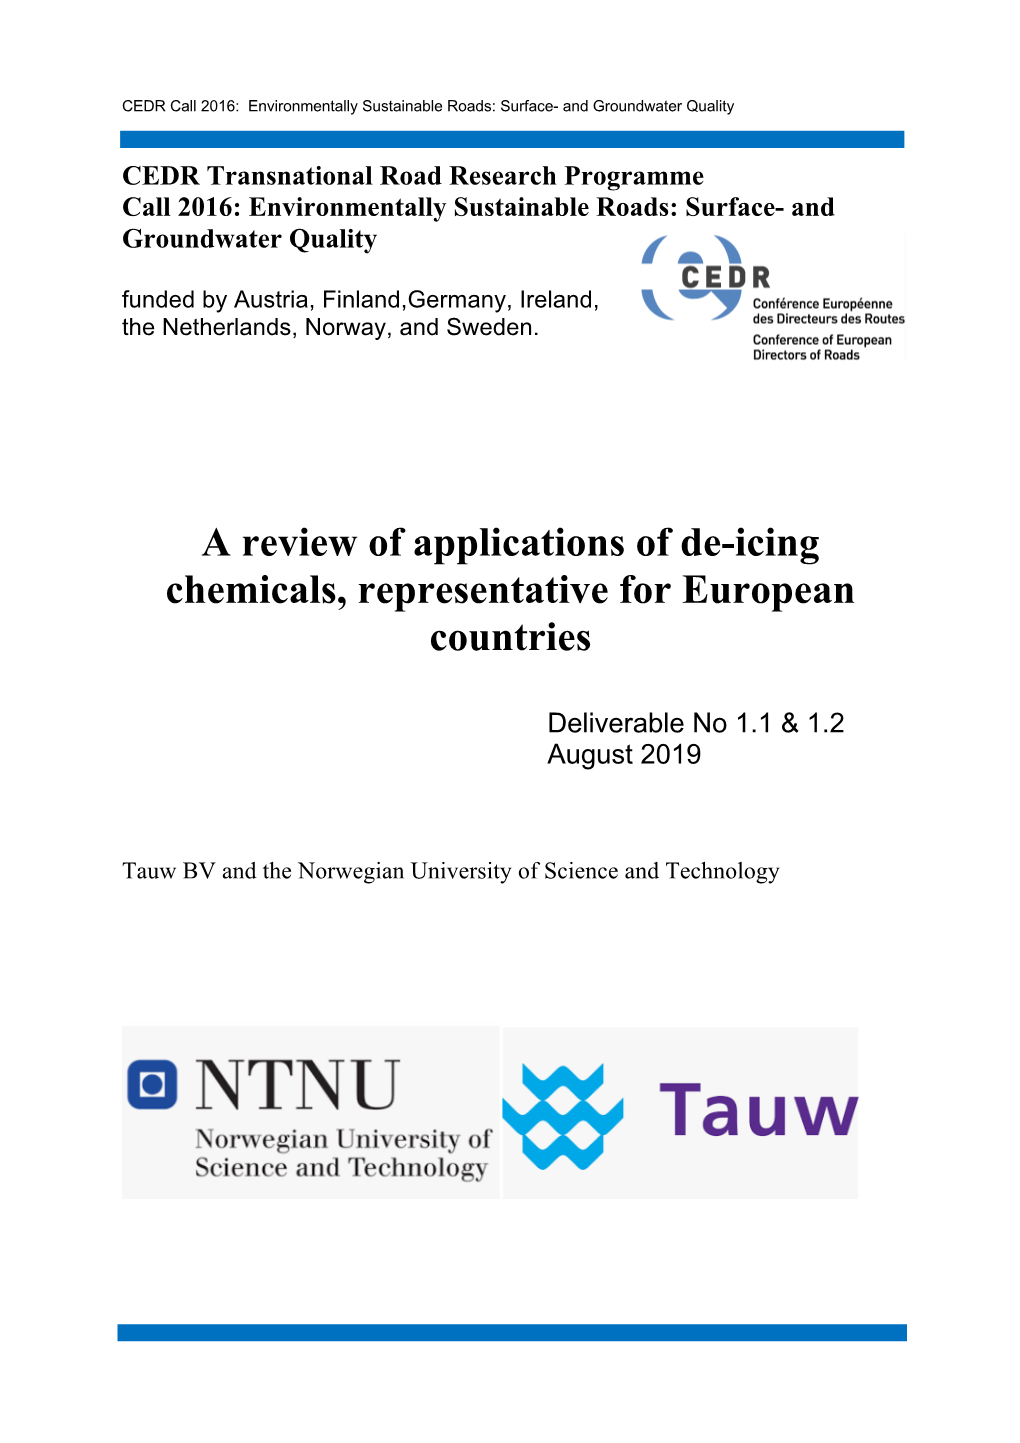 A Review of Applications of De-Icing Chemicals, Representative for European Countries